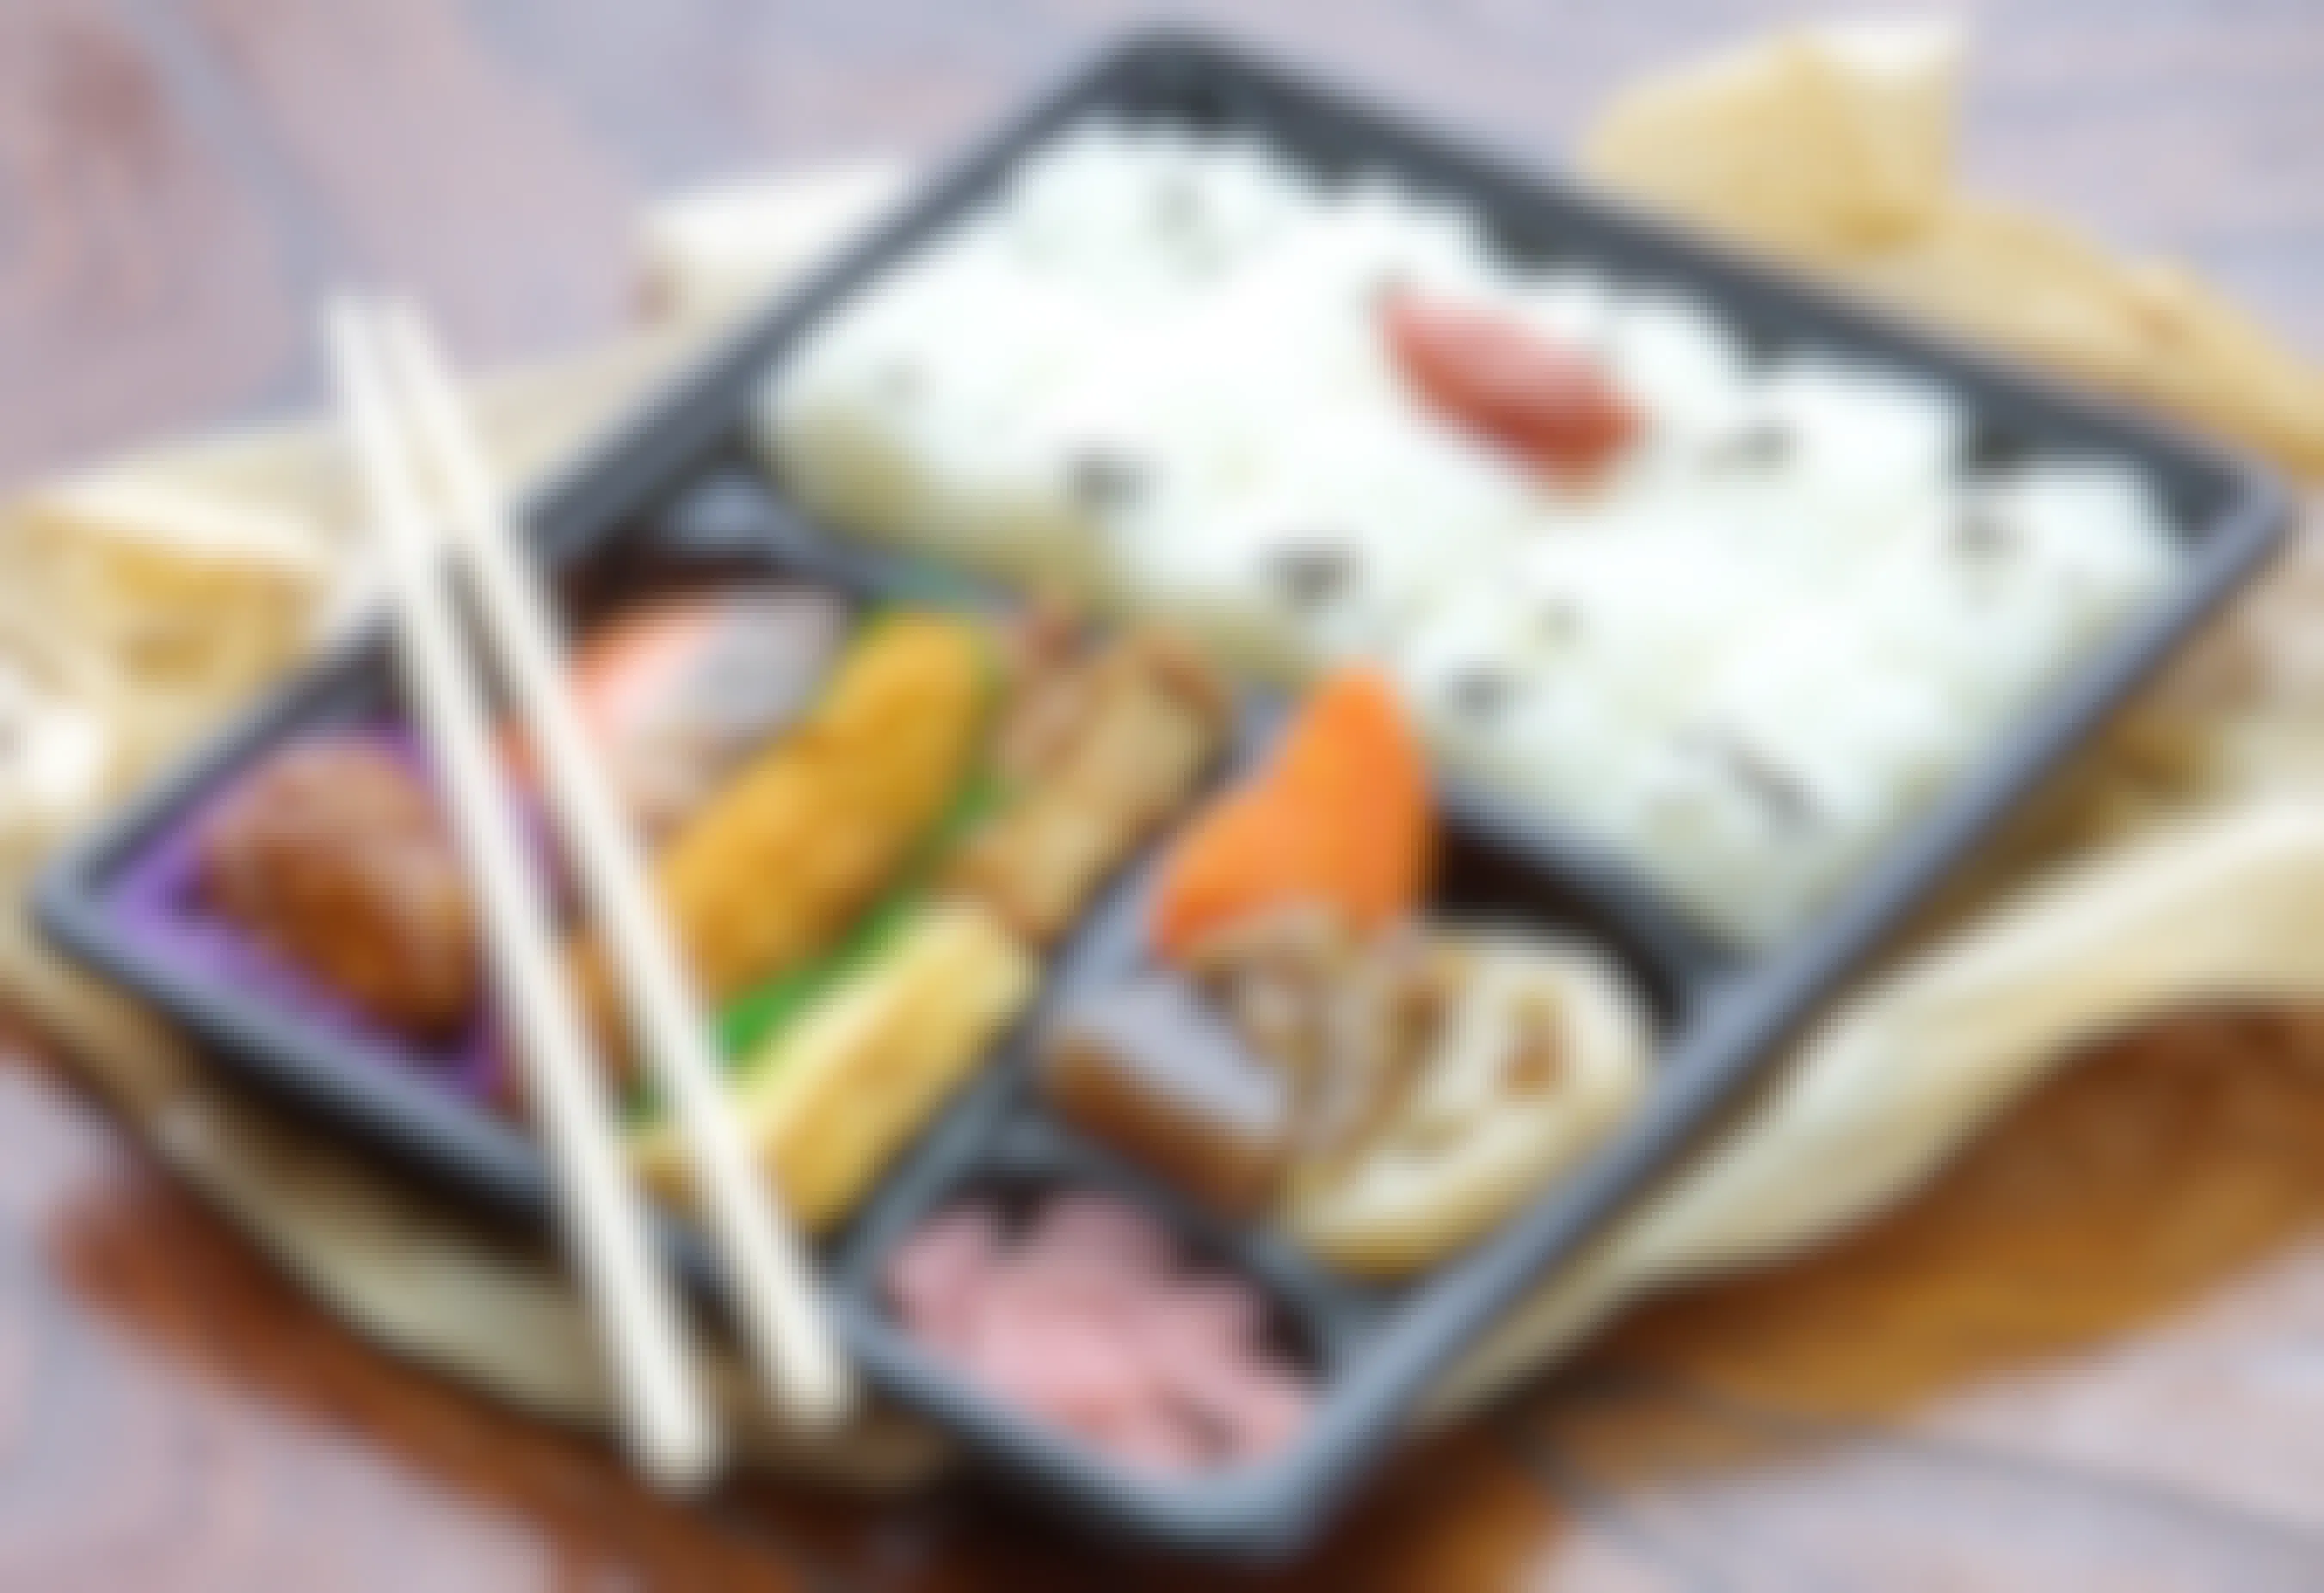 A bento box lunch sitting on a table with chopsticks